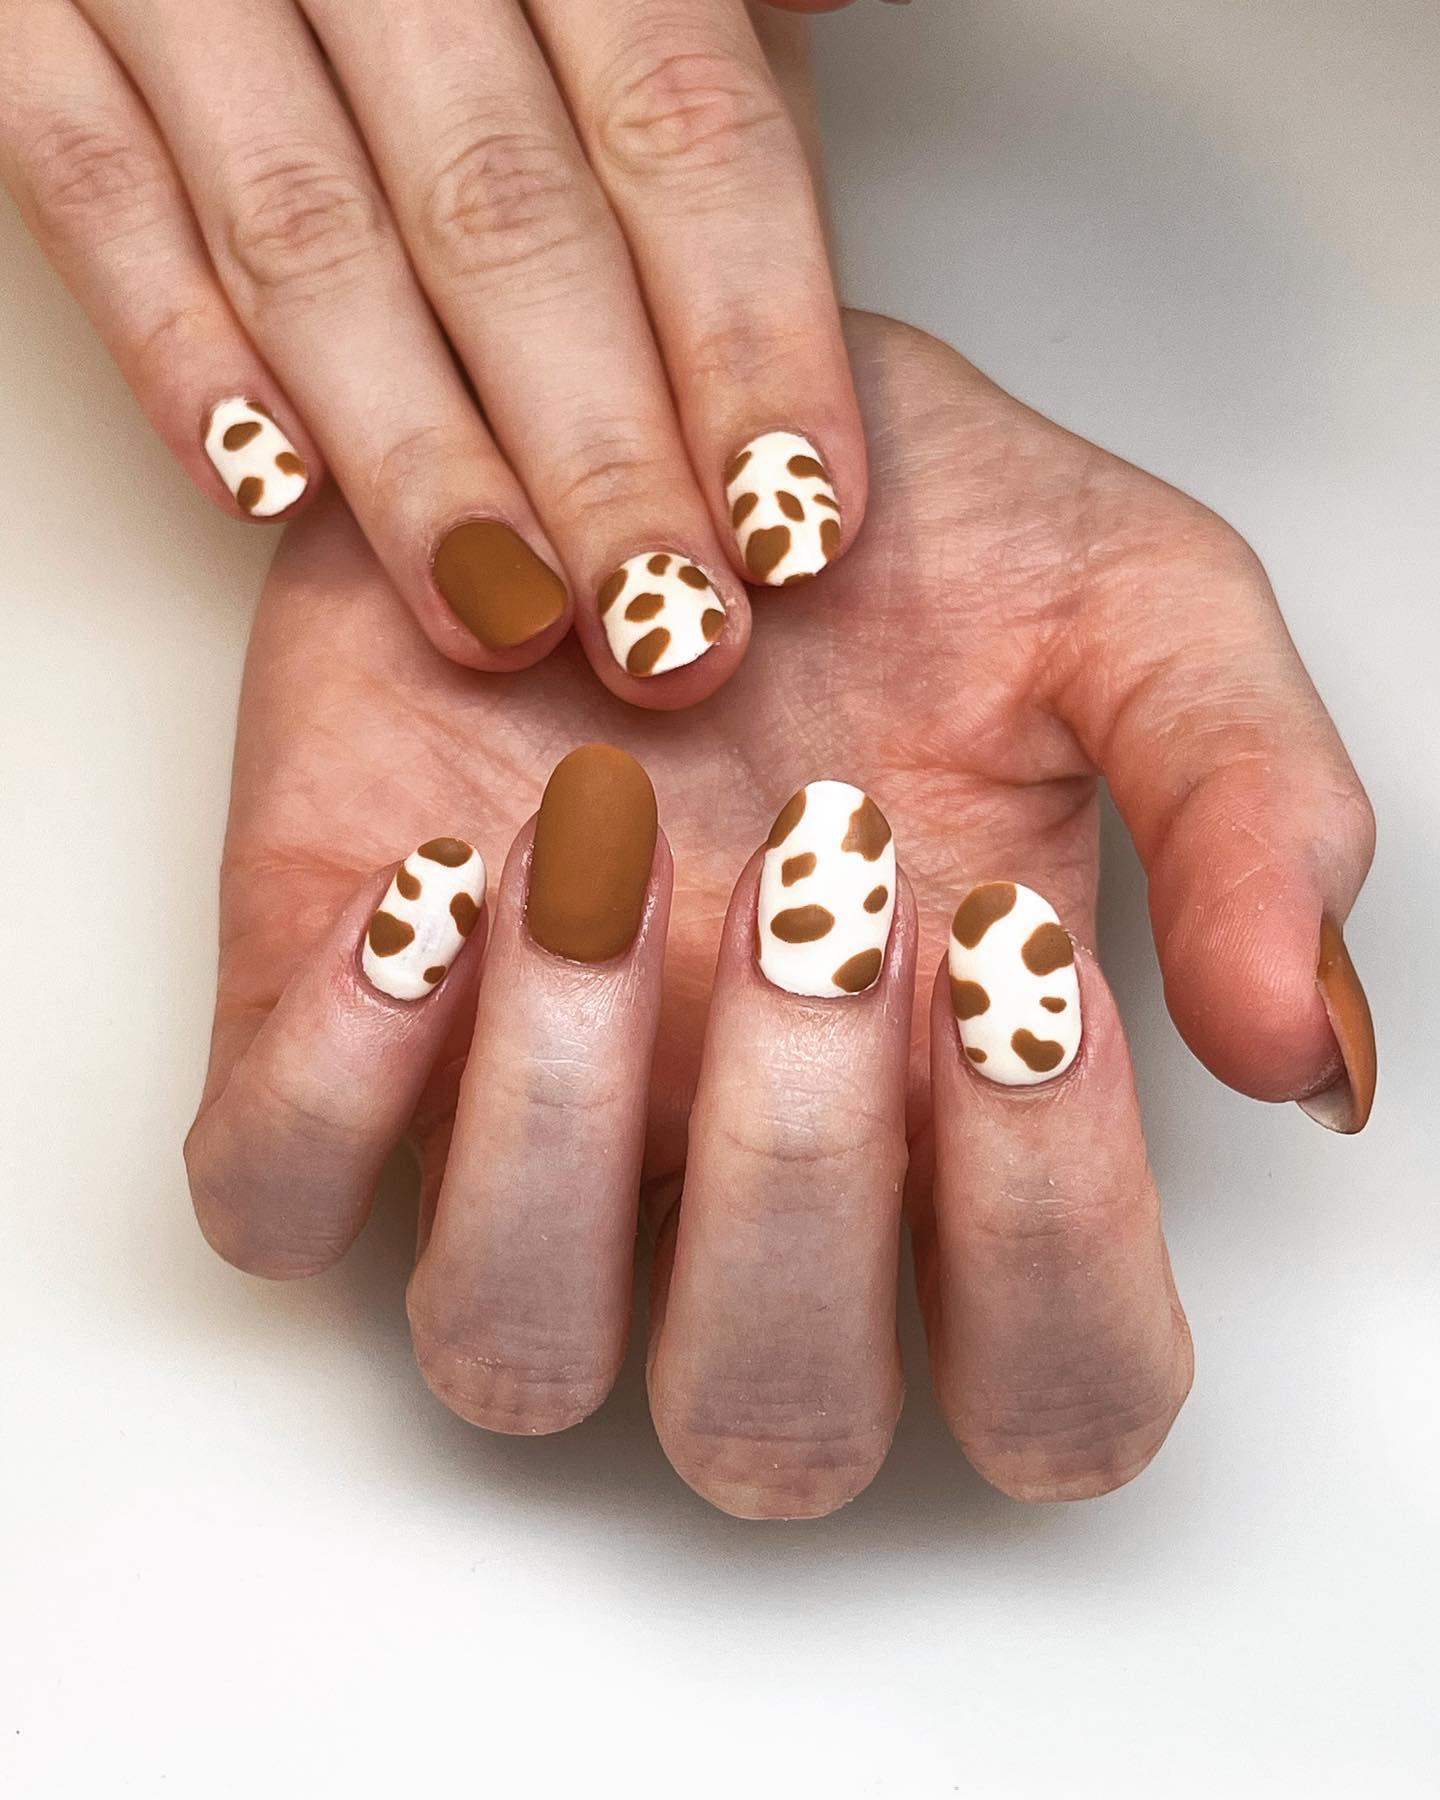 Representing simplicity and steadfastness, brown is such an elegant color that all of its shades are perfect for nail designs. Plus, applying this color with a cow print nail art sounds much more fun!